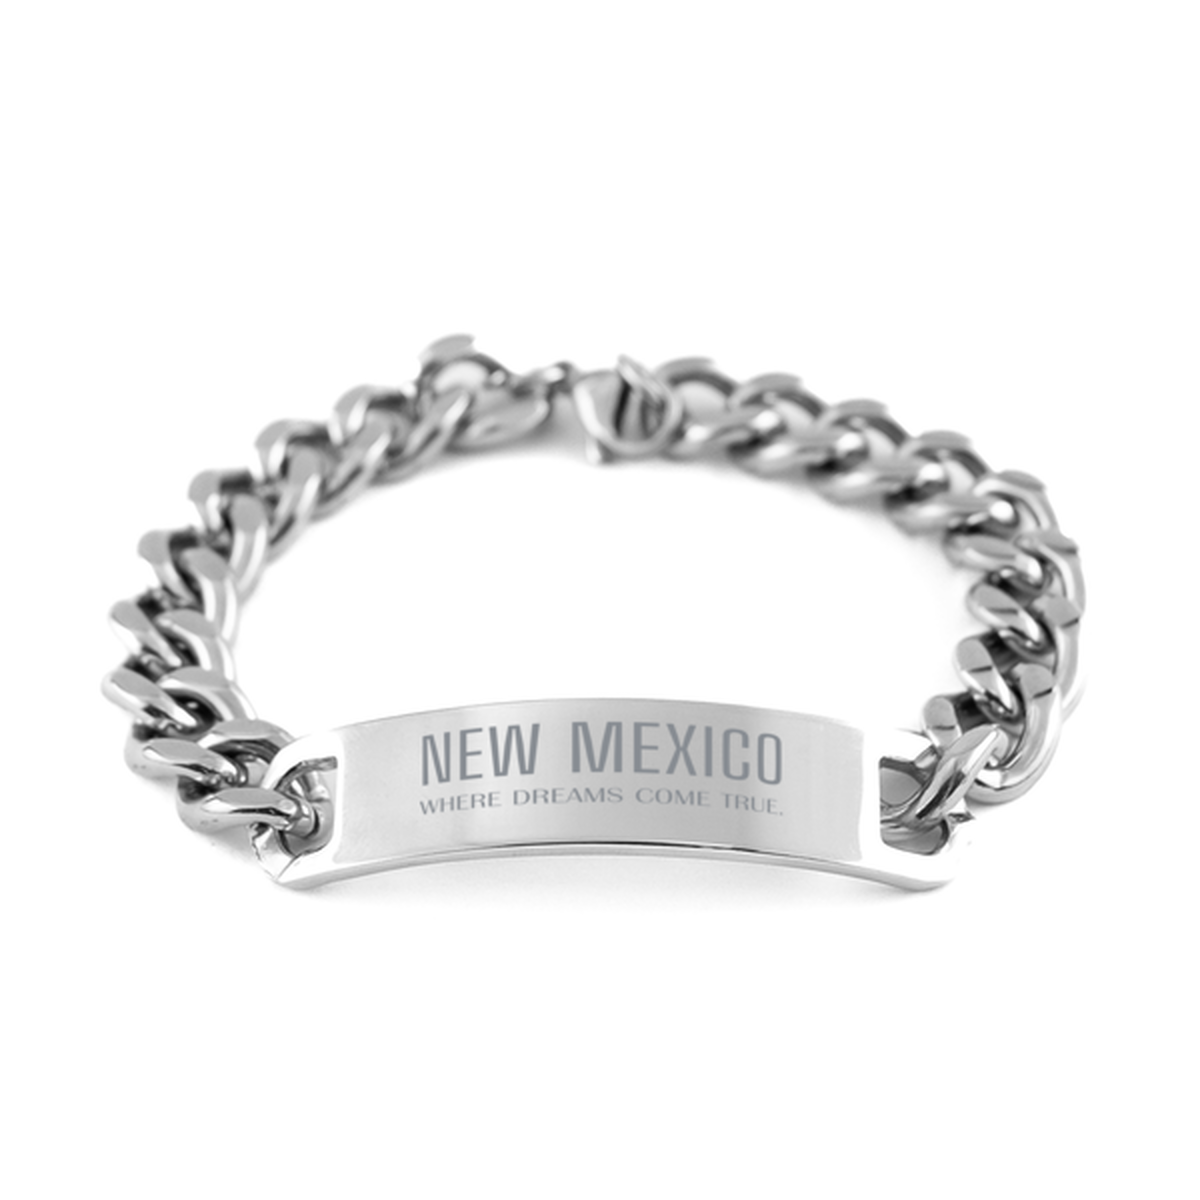 Love New Mexico State Cuban Chain Stainless Steel Bracelet, New Mexico Where dreams come true, Birthday Inspirational Gifts For New Mexico Men, Women, Friends